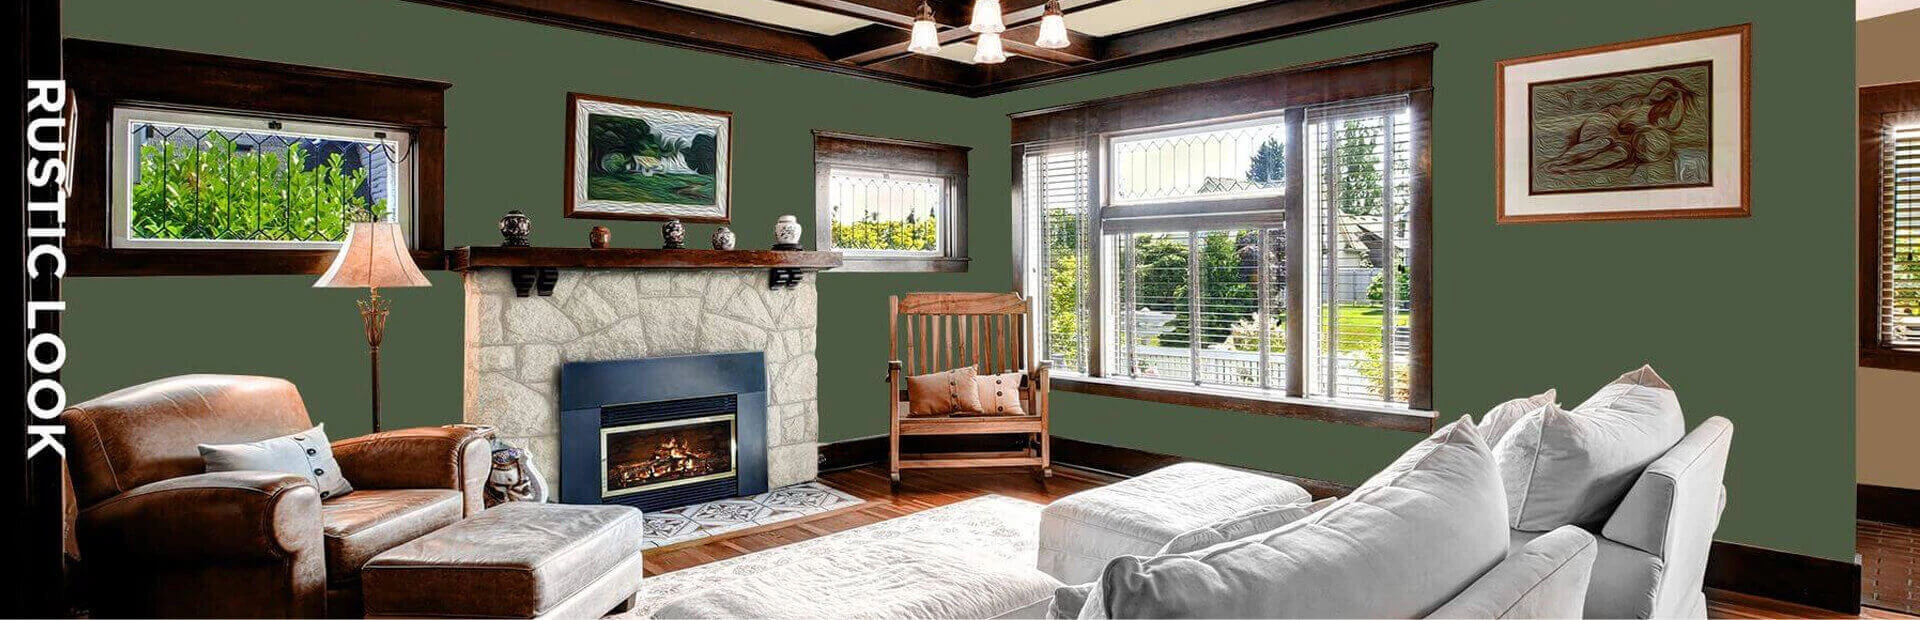 Rustic style living room in tan, forest green, and brown, featuring furniture and paintings on walls.